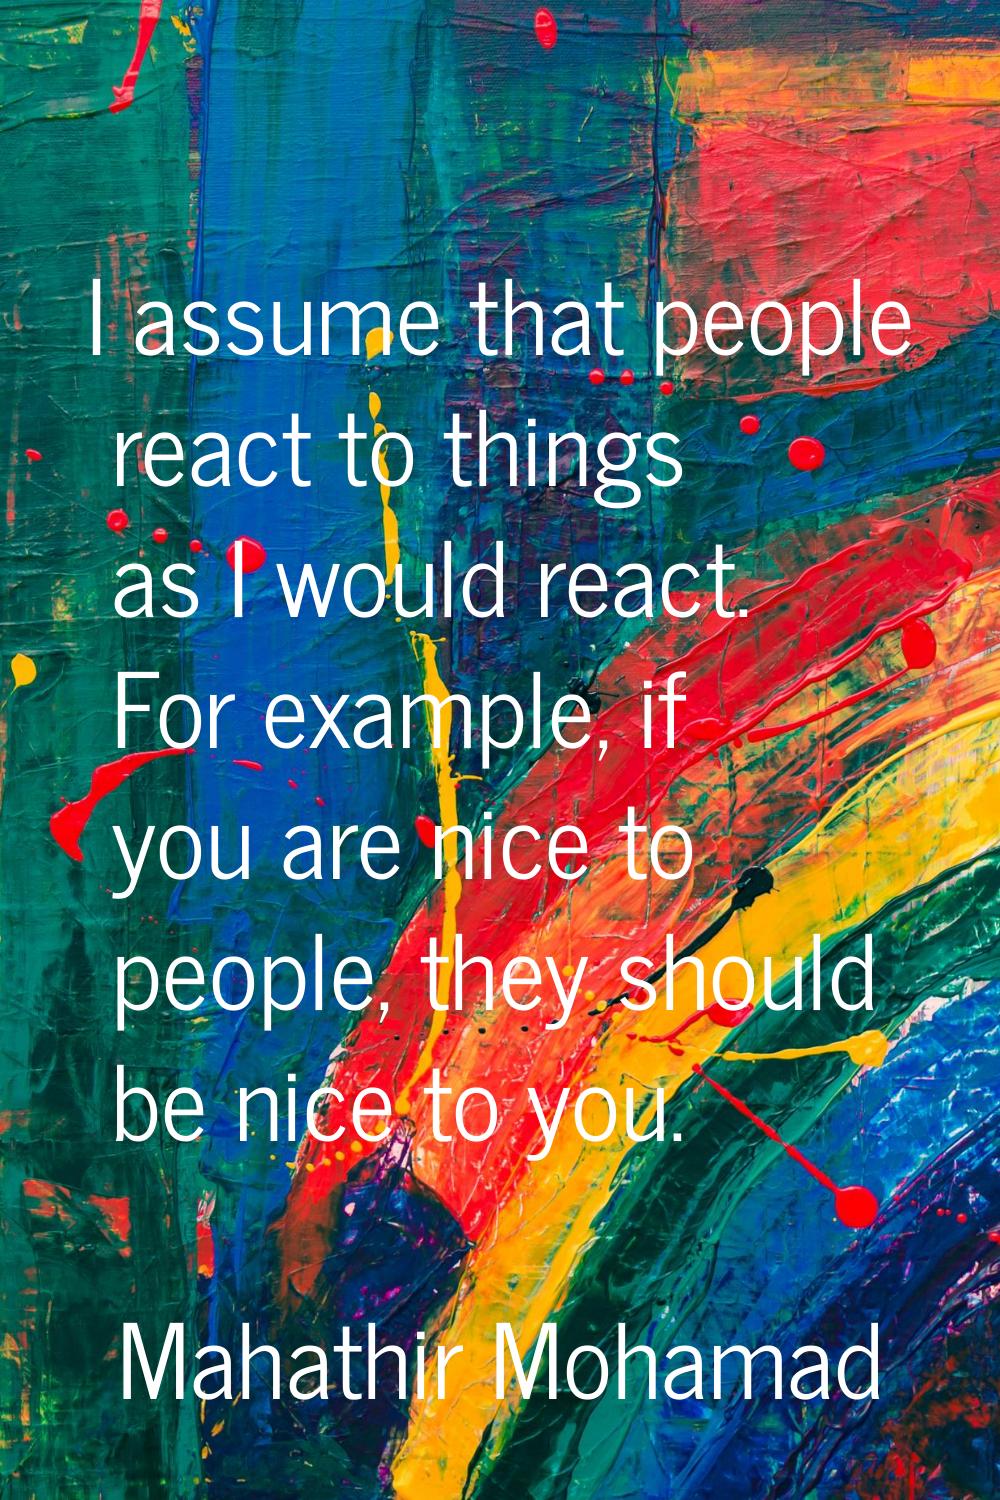 I assume that people react to things as I would react. For example, if you are nice to people, they